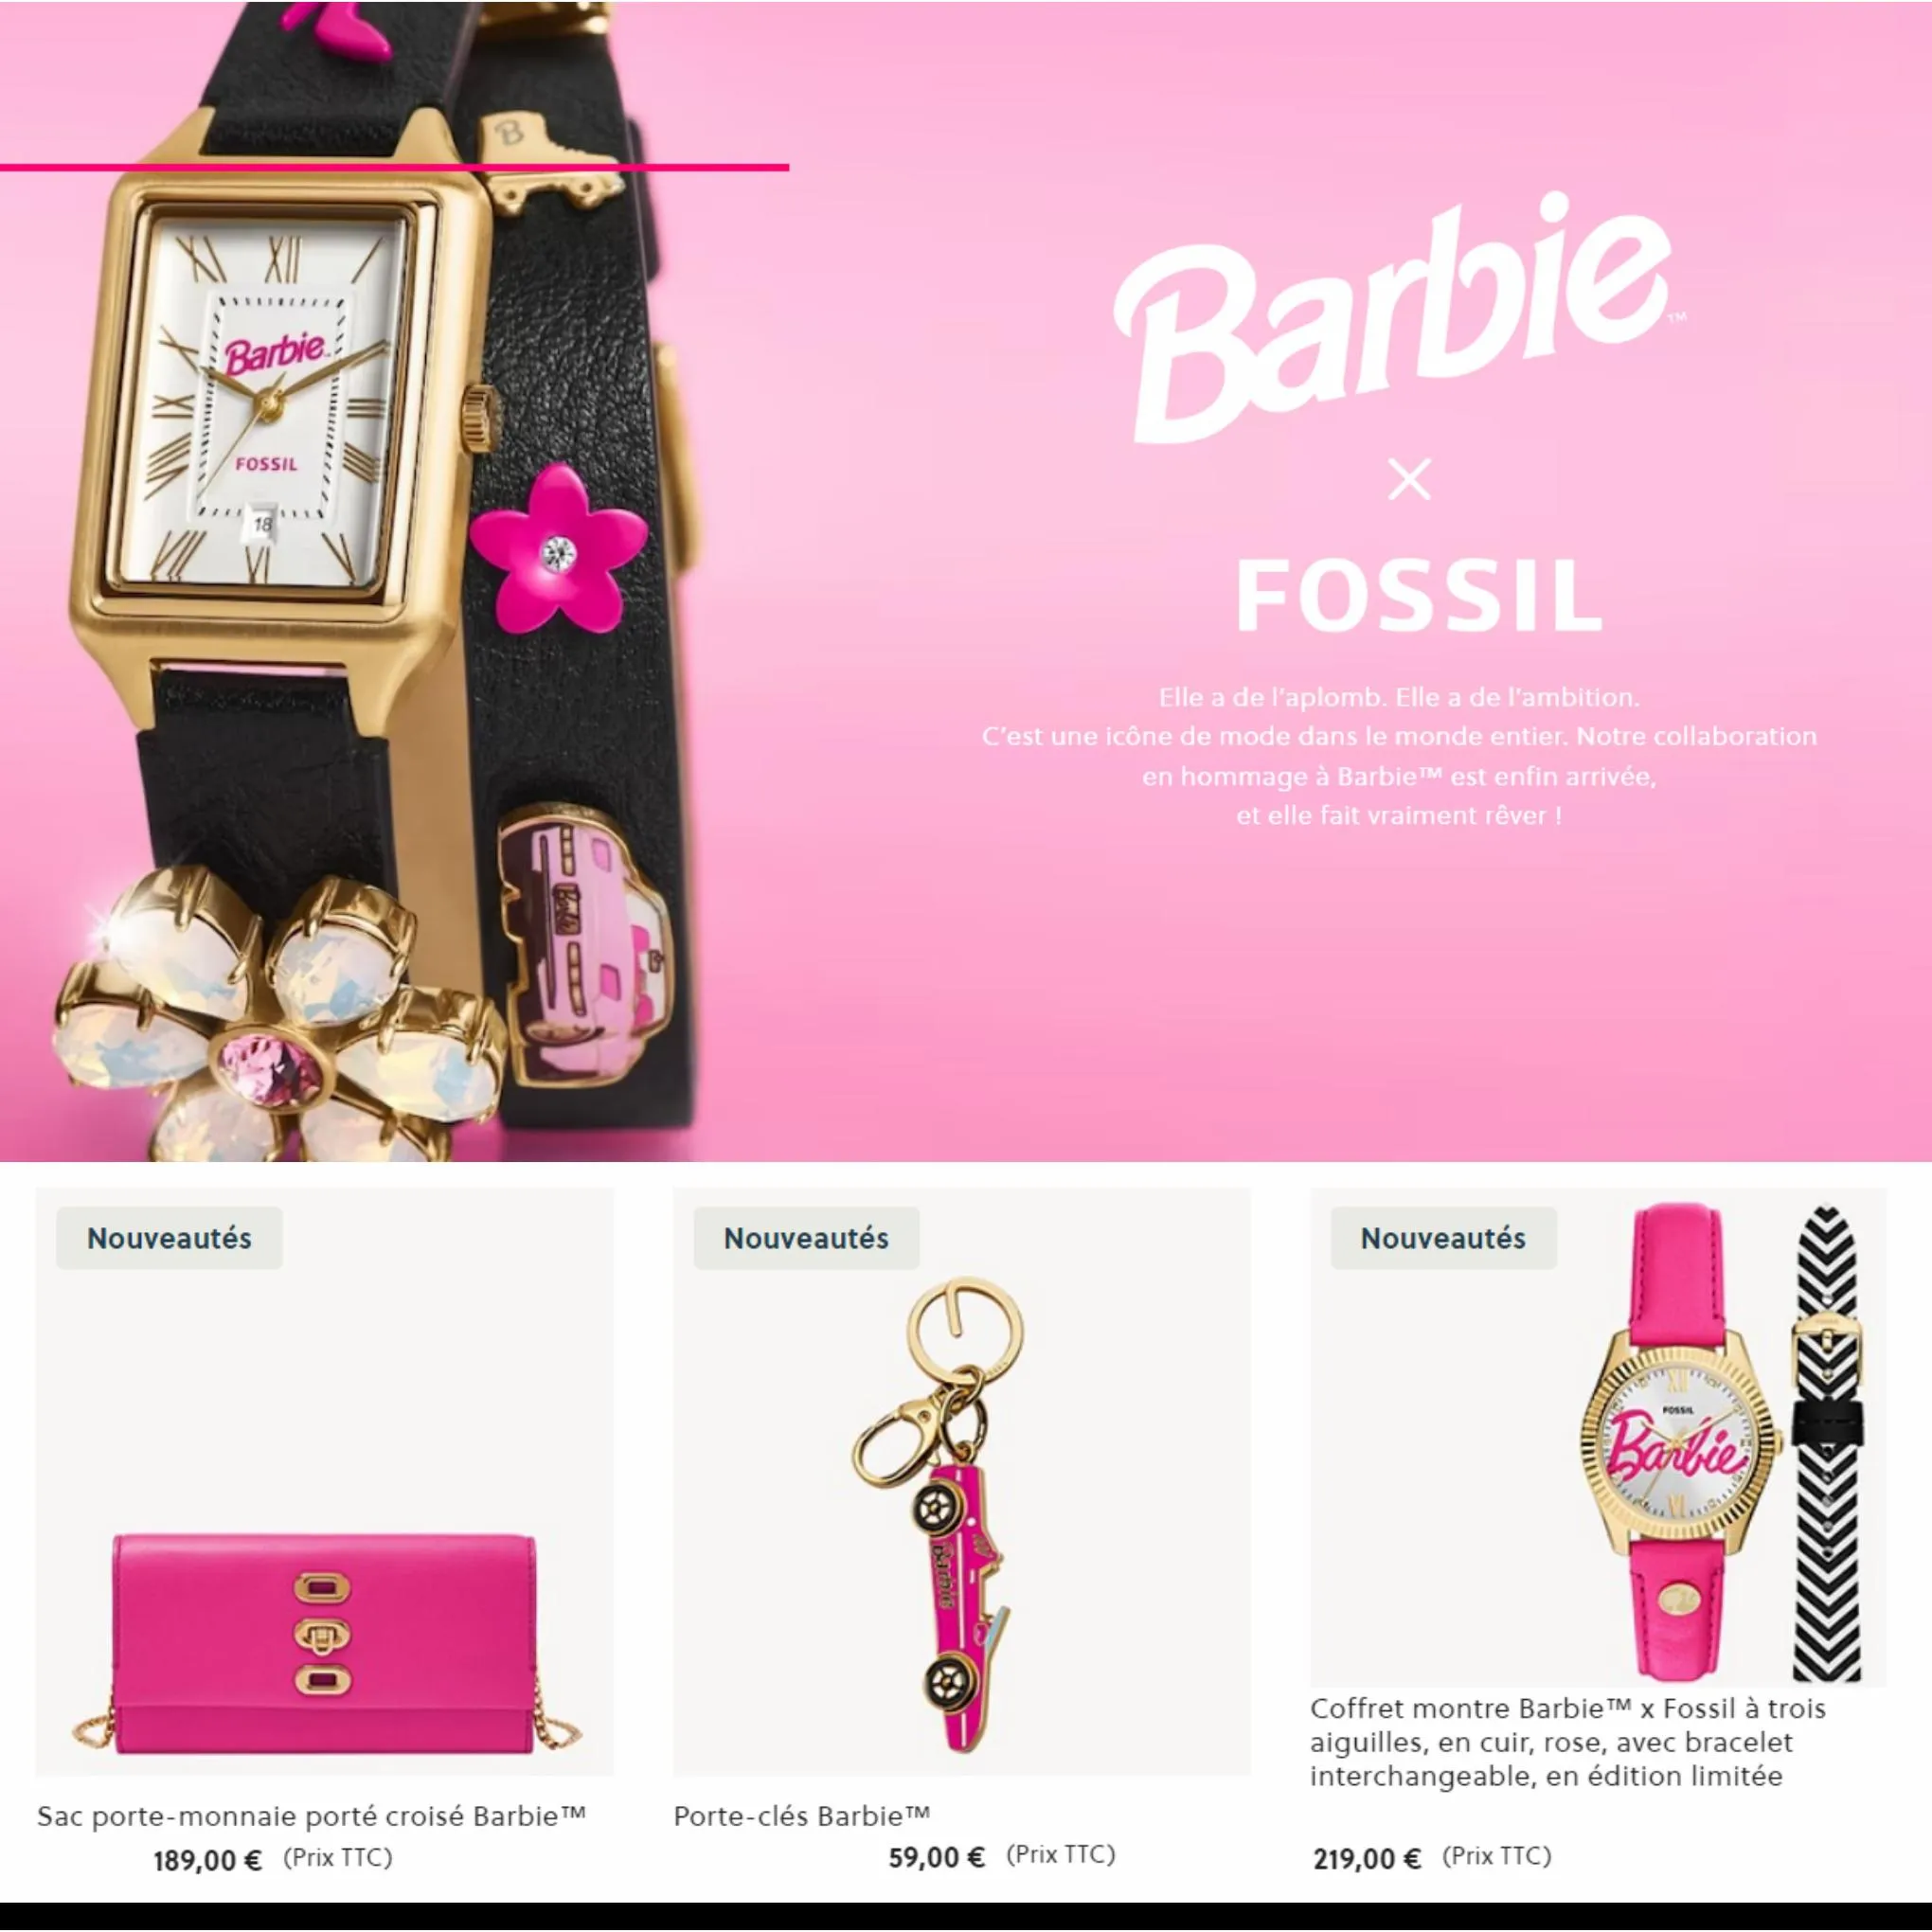 Catalogue Barbie x Fossil, page 00001